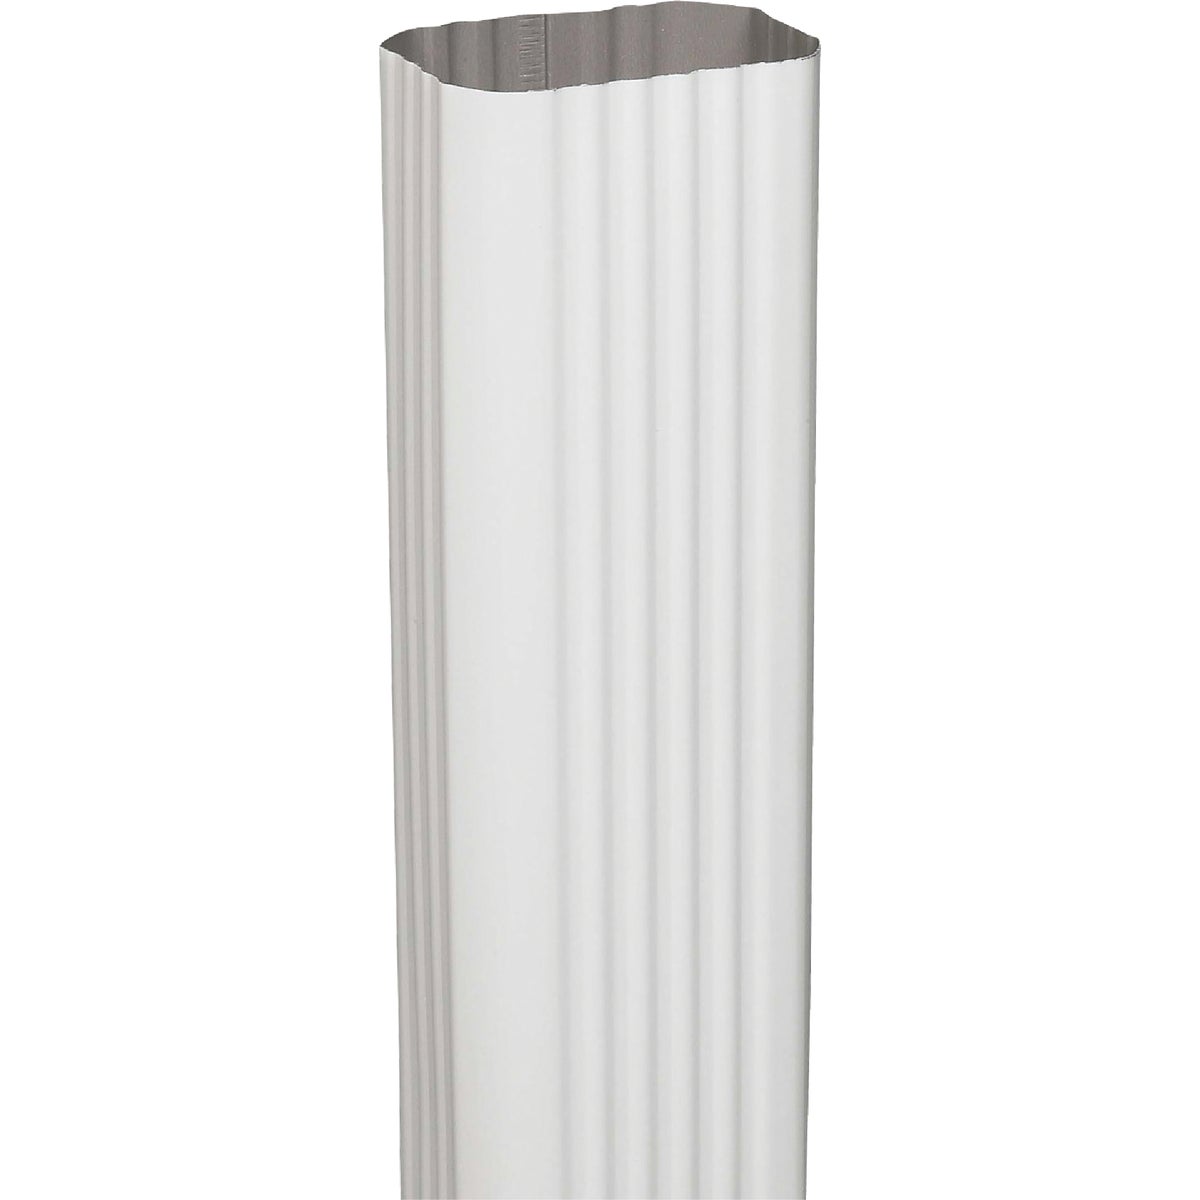 Spectra Metals 2 In. x 3 In. x 15 In. K-Style White Aluminum Downspout Extension